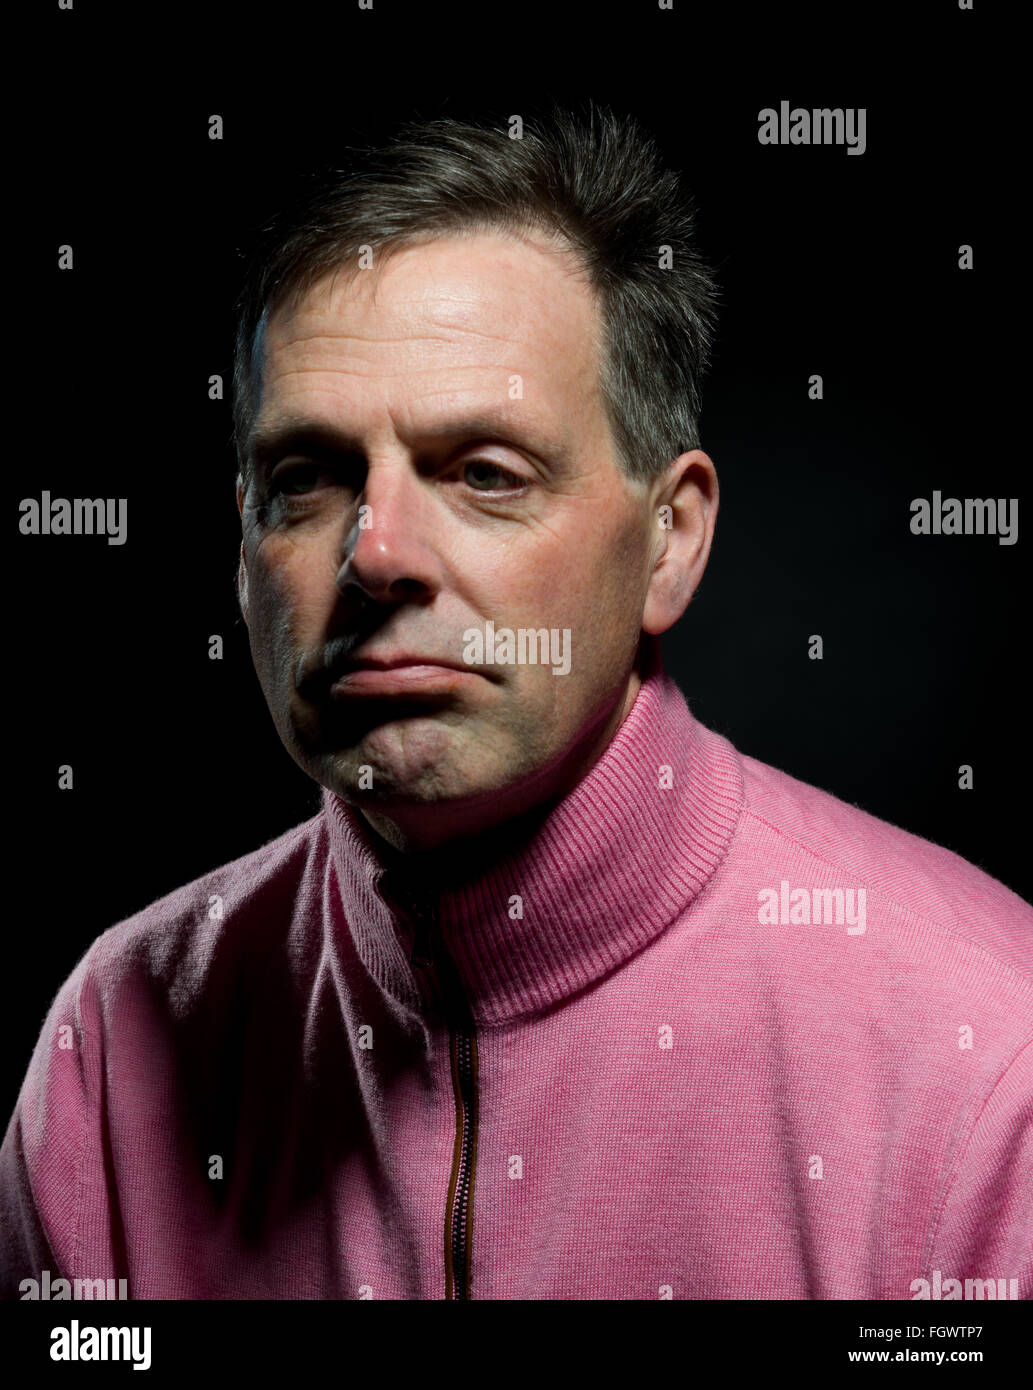 Middle aged man with a sad face. Fed up expression. Bored and lonely. Depression. Mental health issues. Stock Photo